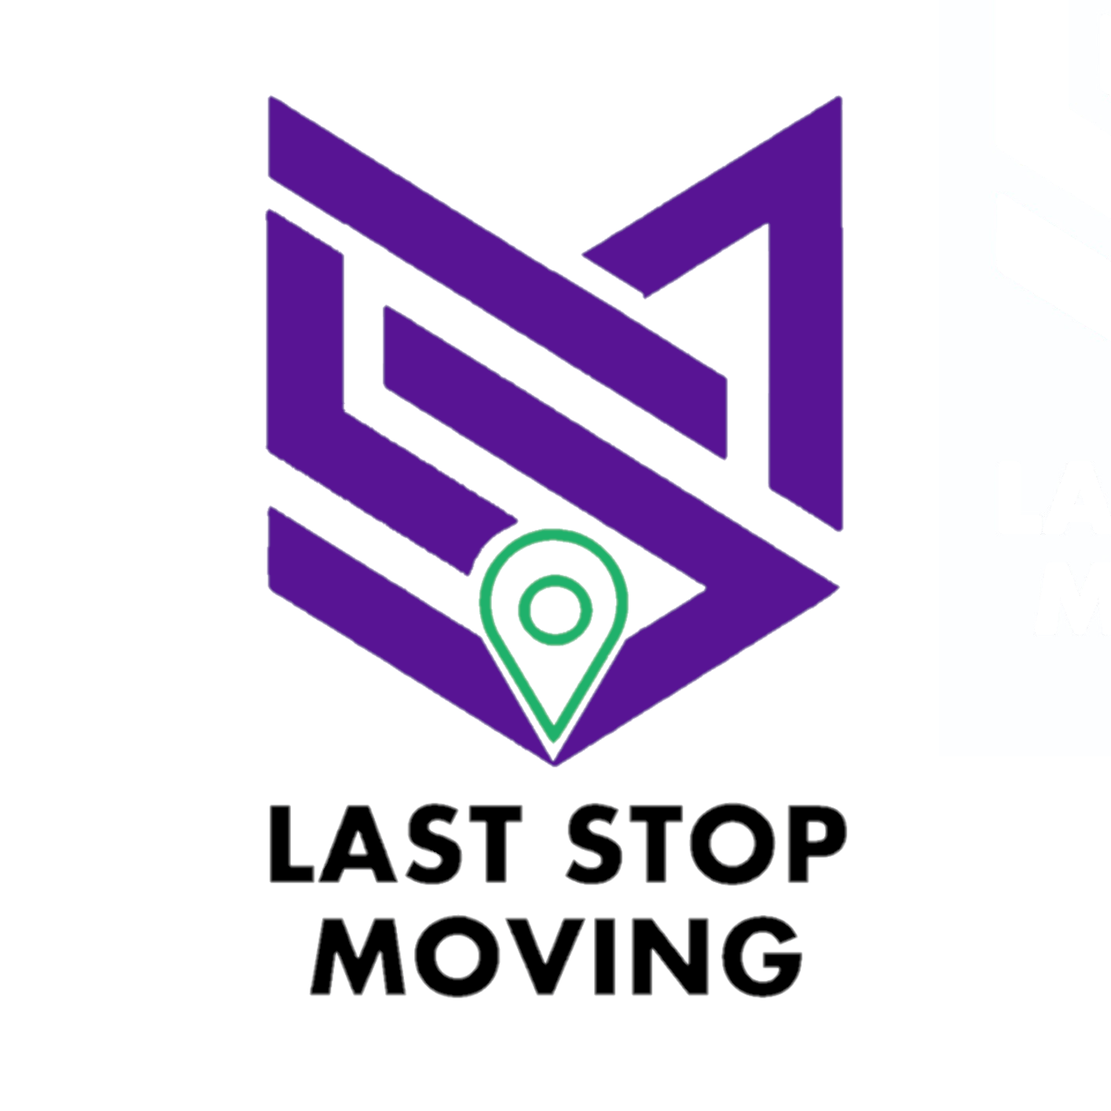 Commercial Moving Services Edmonton | Last Stop Moving